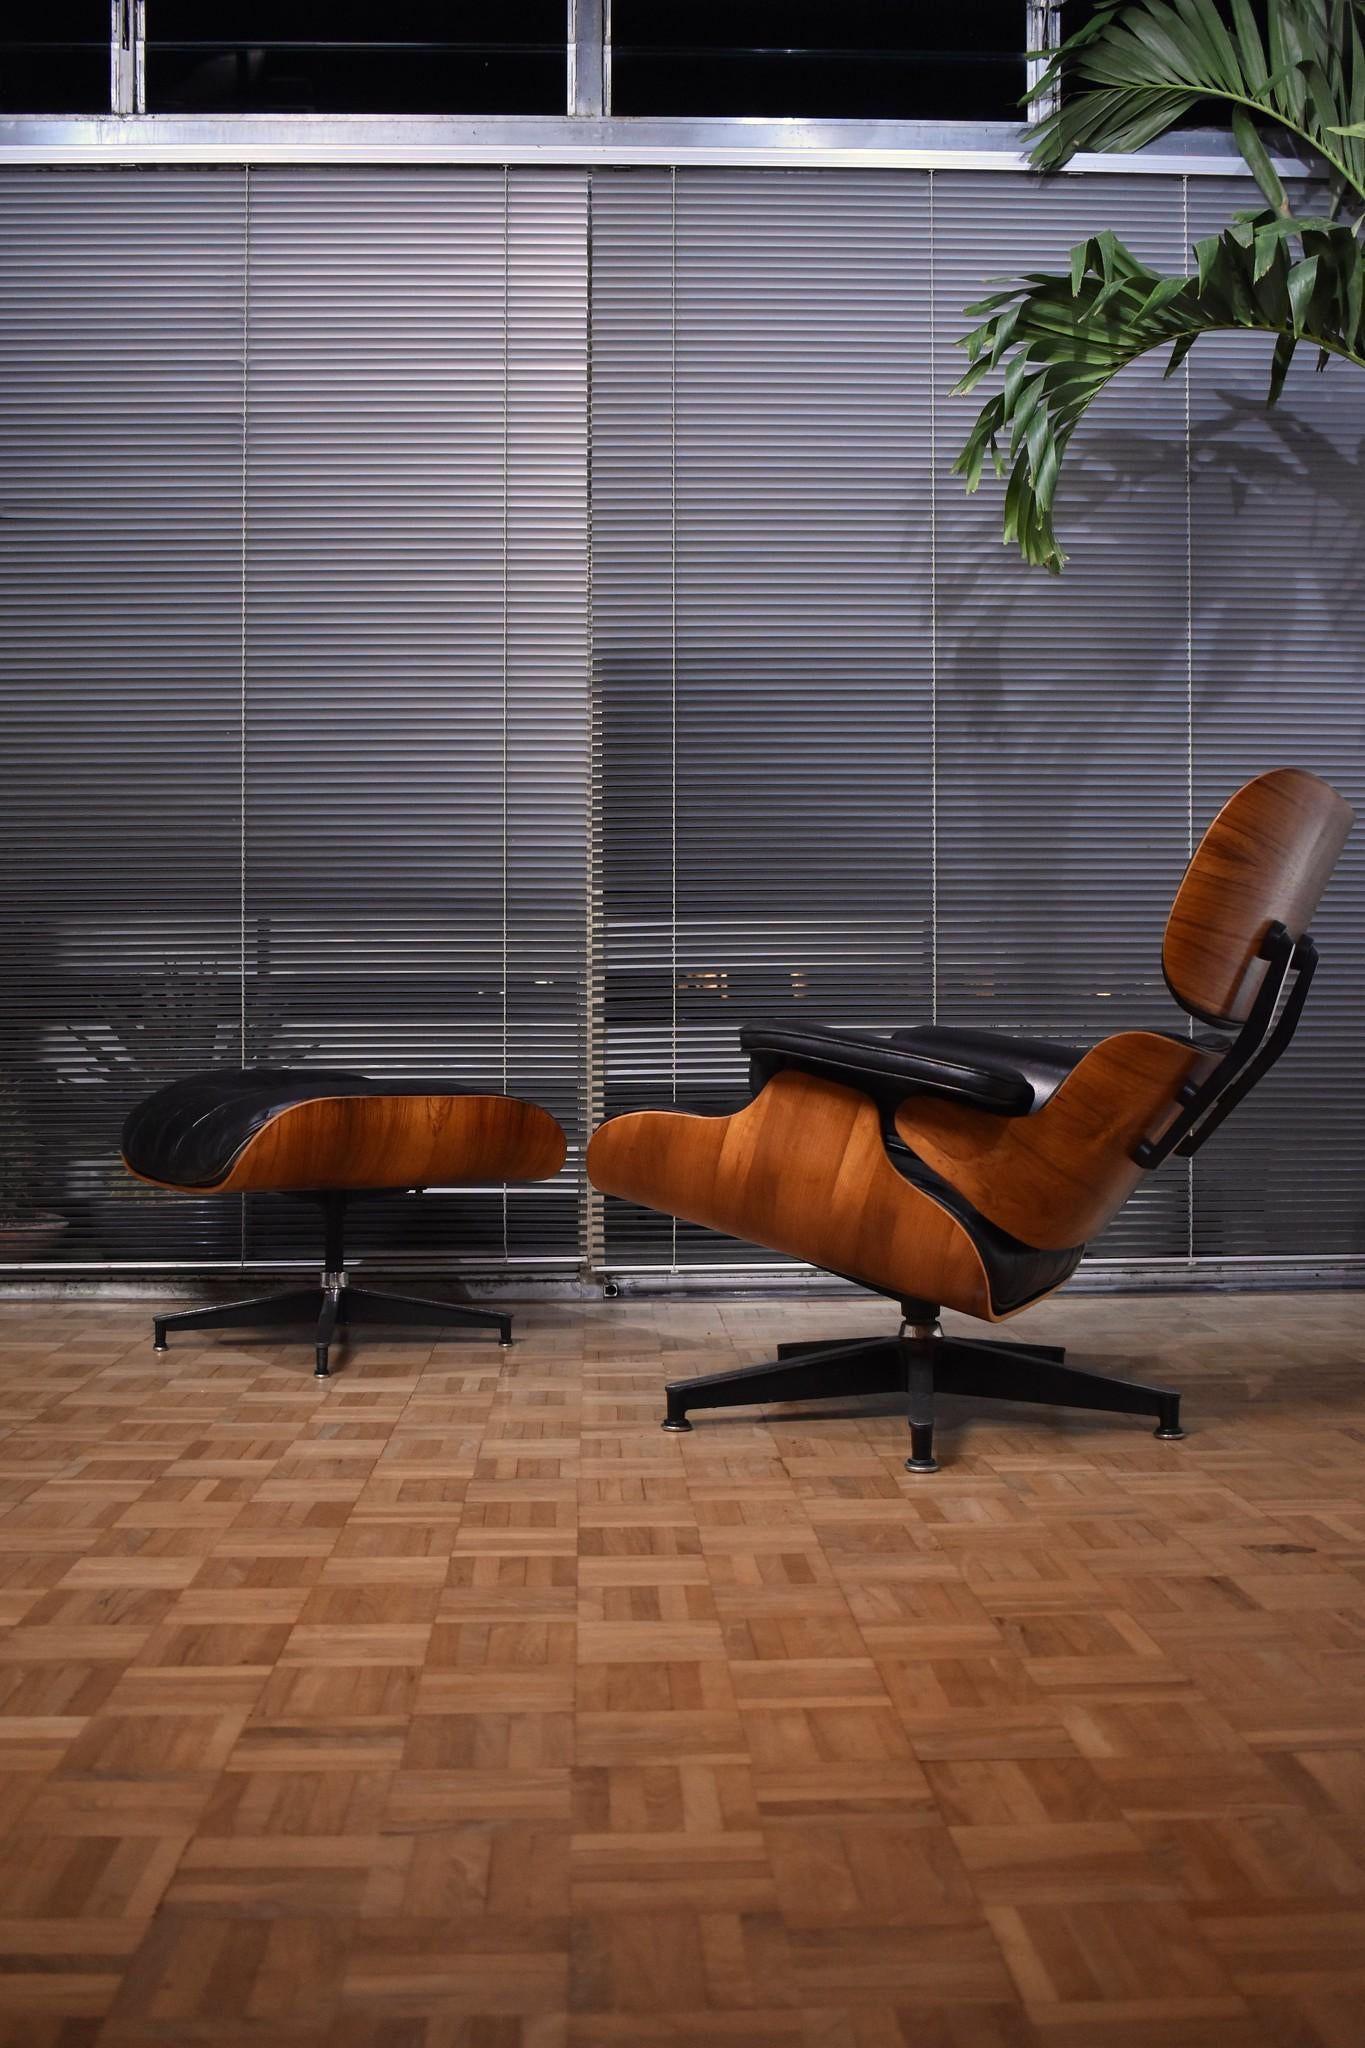 A particularly nice Brazilian rosewood and black leather Eames lounge chair & ottoman produced by Herman Miller.

This is what some would describe as a second generation chair with cushions filled with a mixture of latex and feather. In our